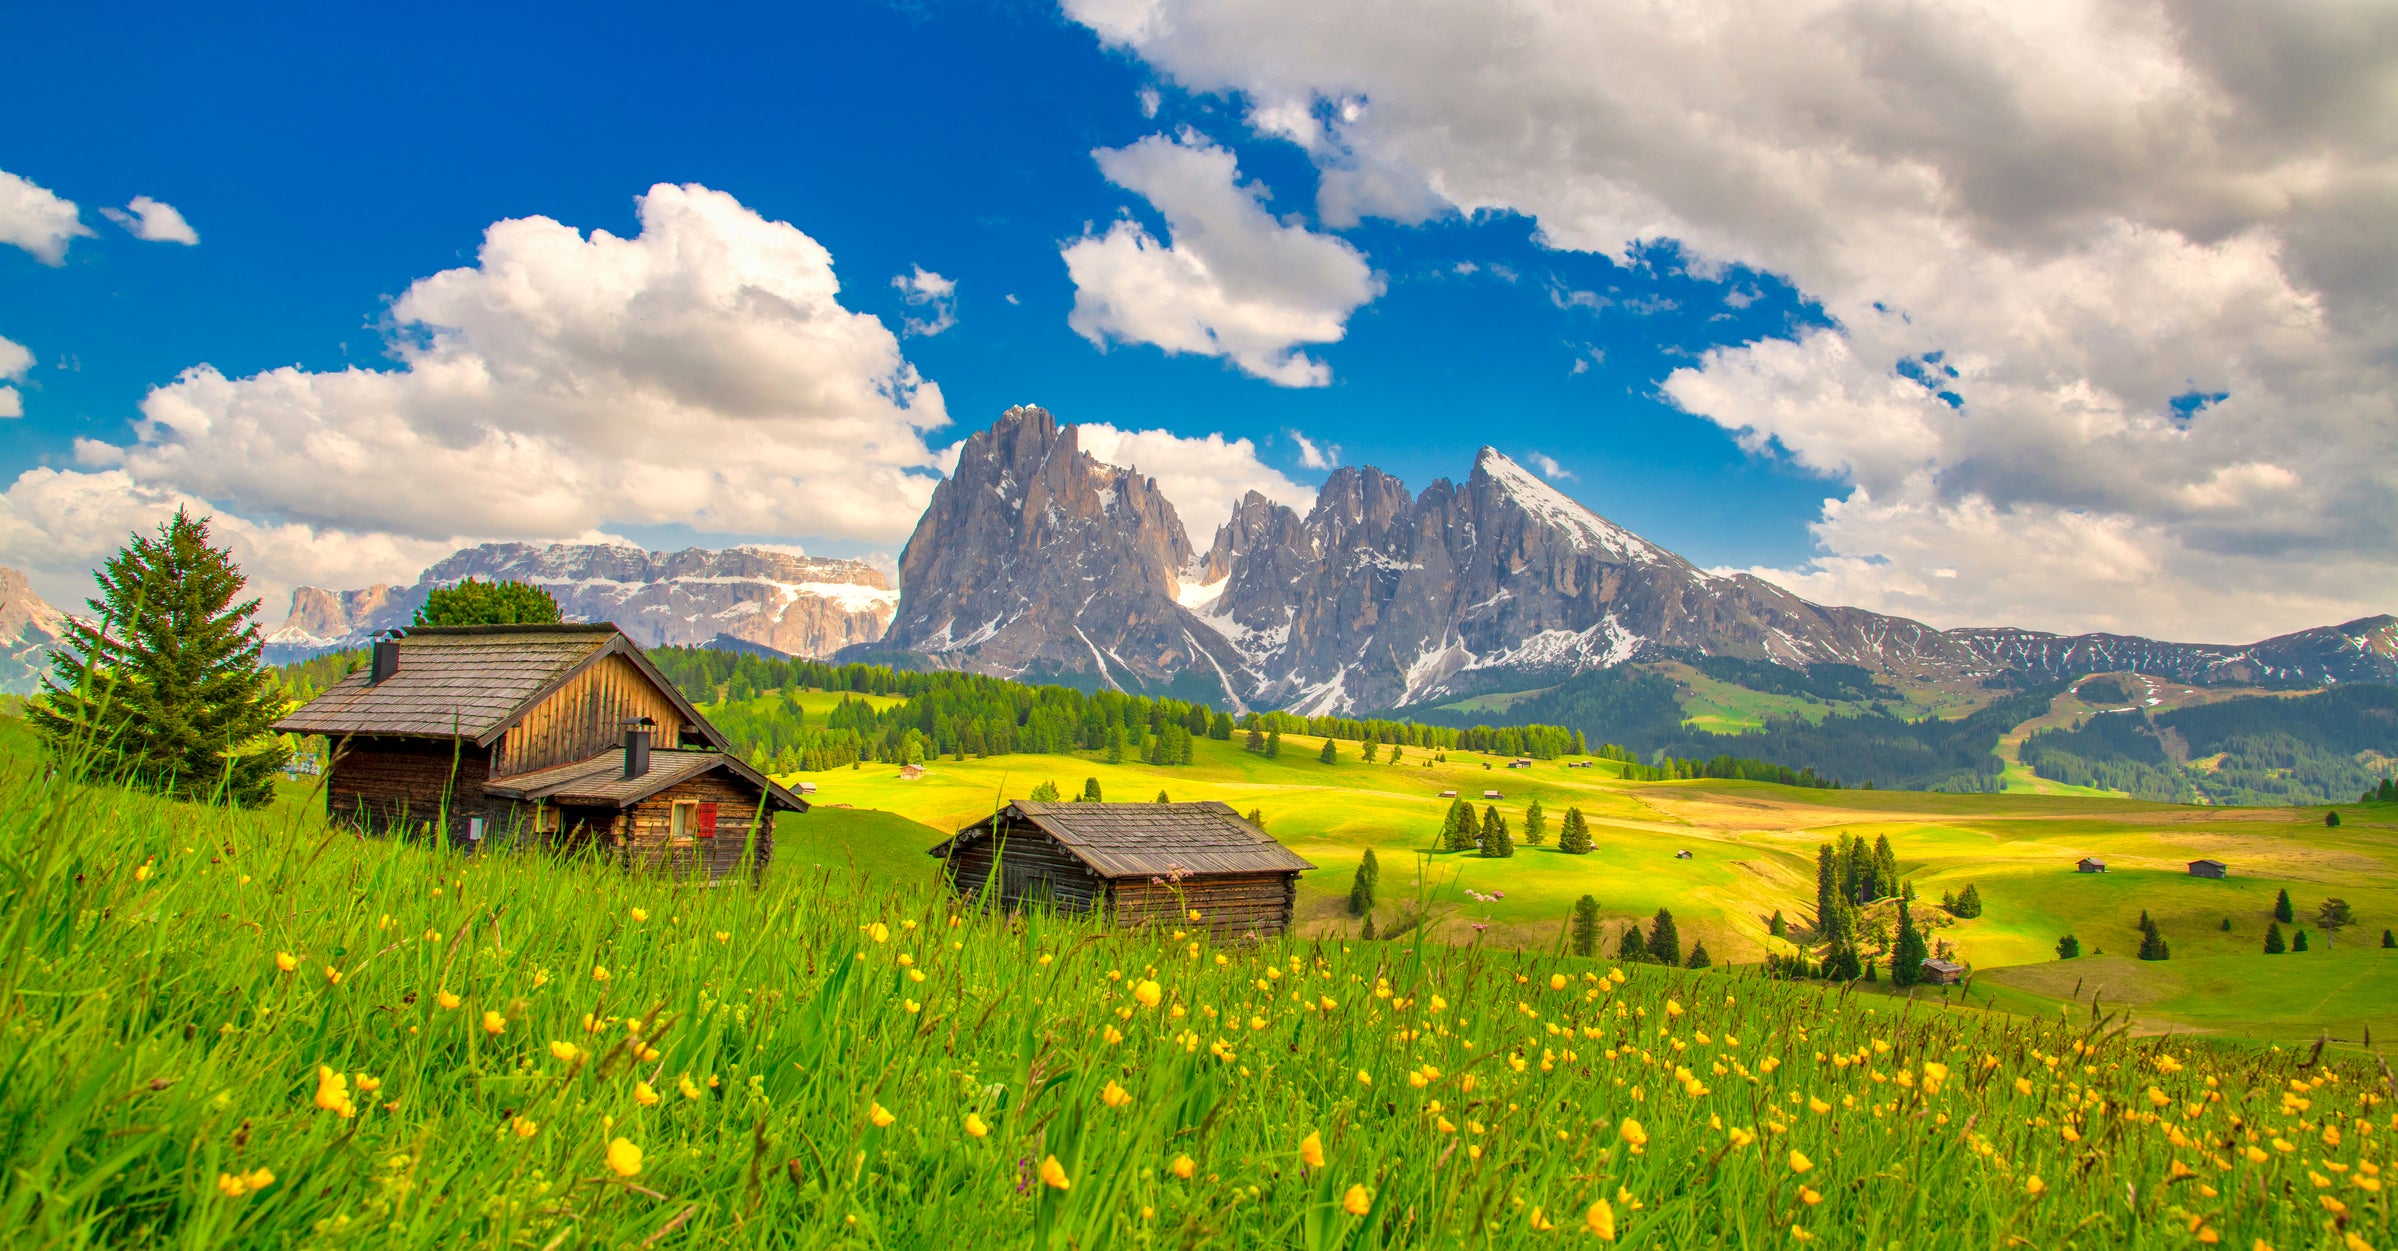 Tourism restrictions are being brought in to protect the wildflowers on the Alpe di Siusi